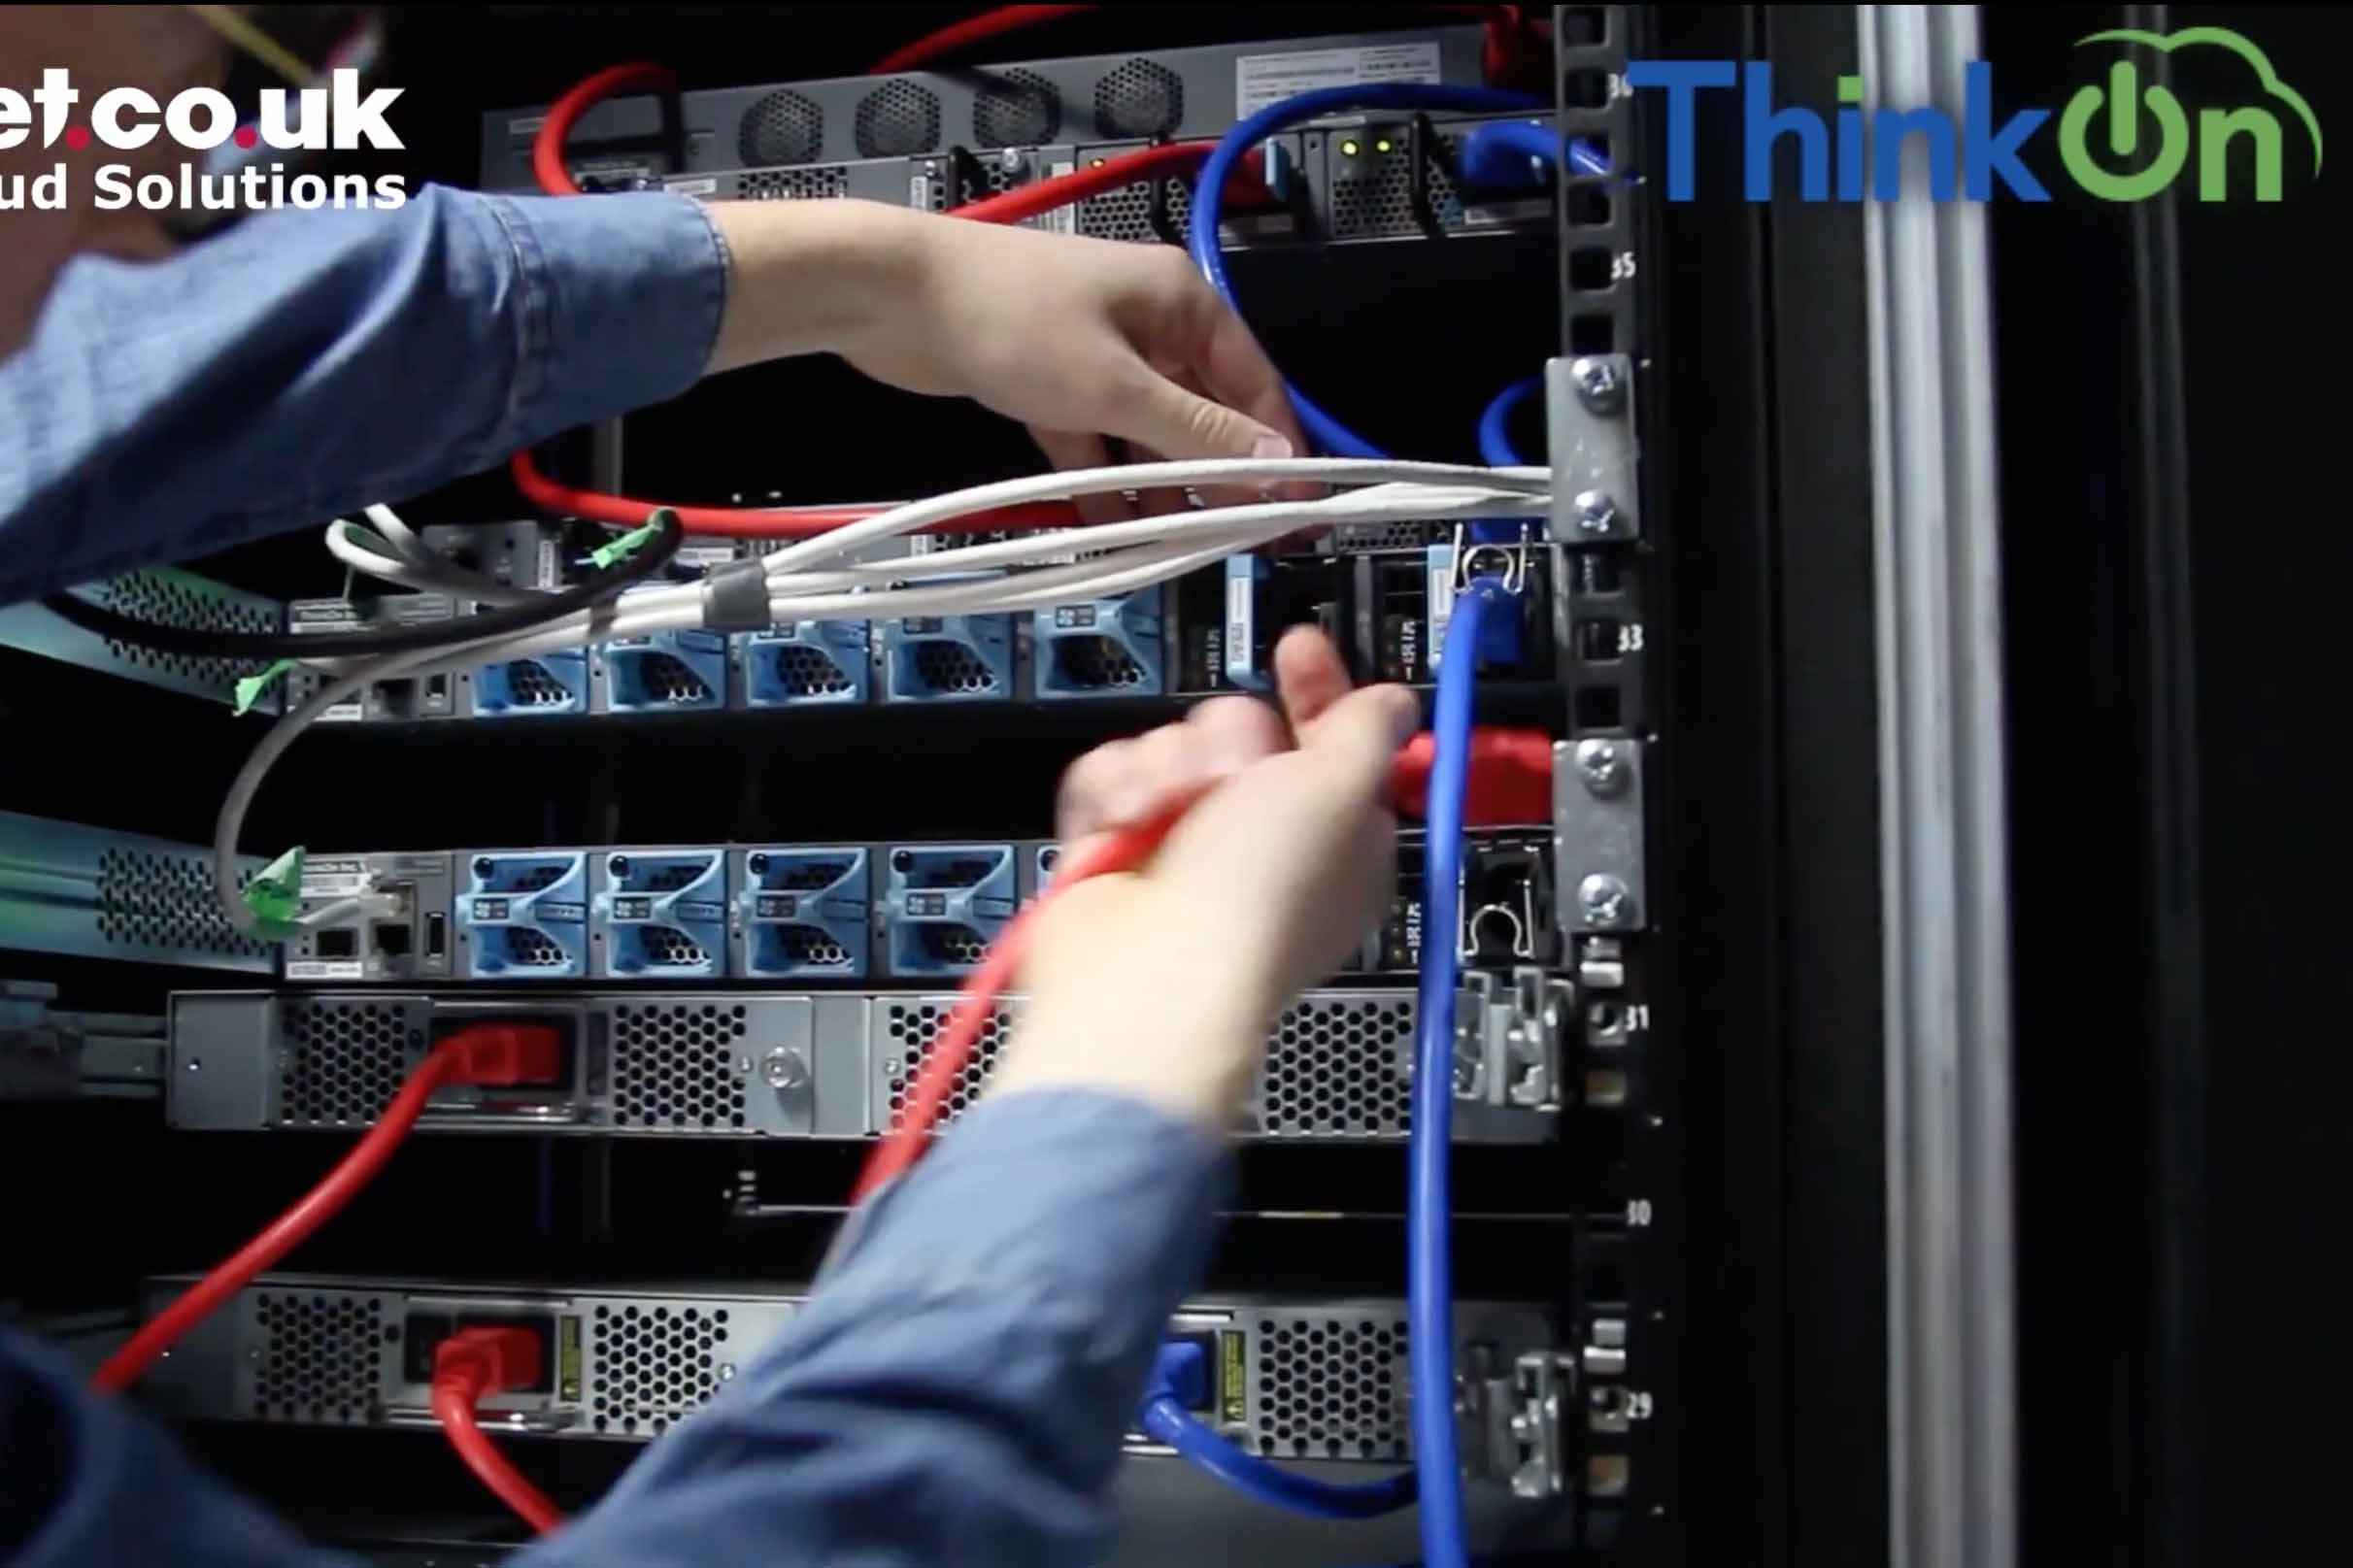 a close up of staff menber's hands as they plugin and install servers into thinkon's rack sapce